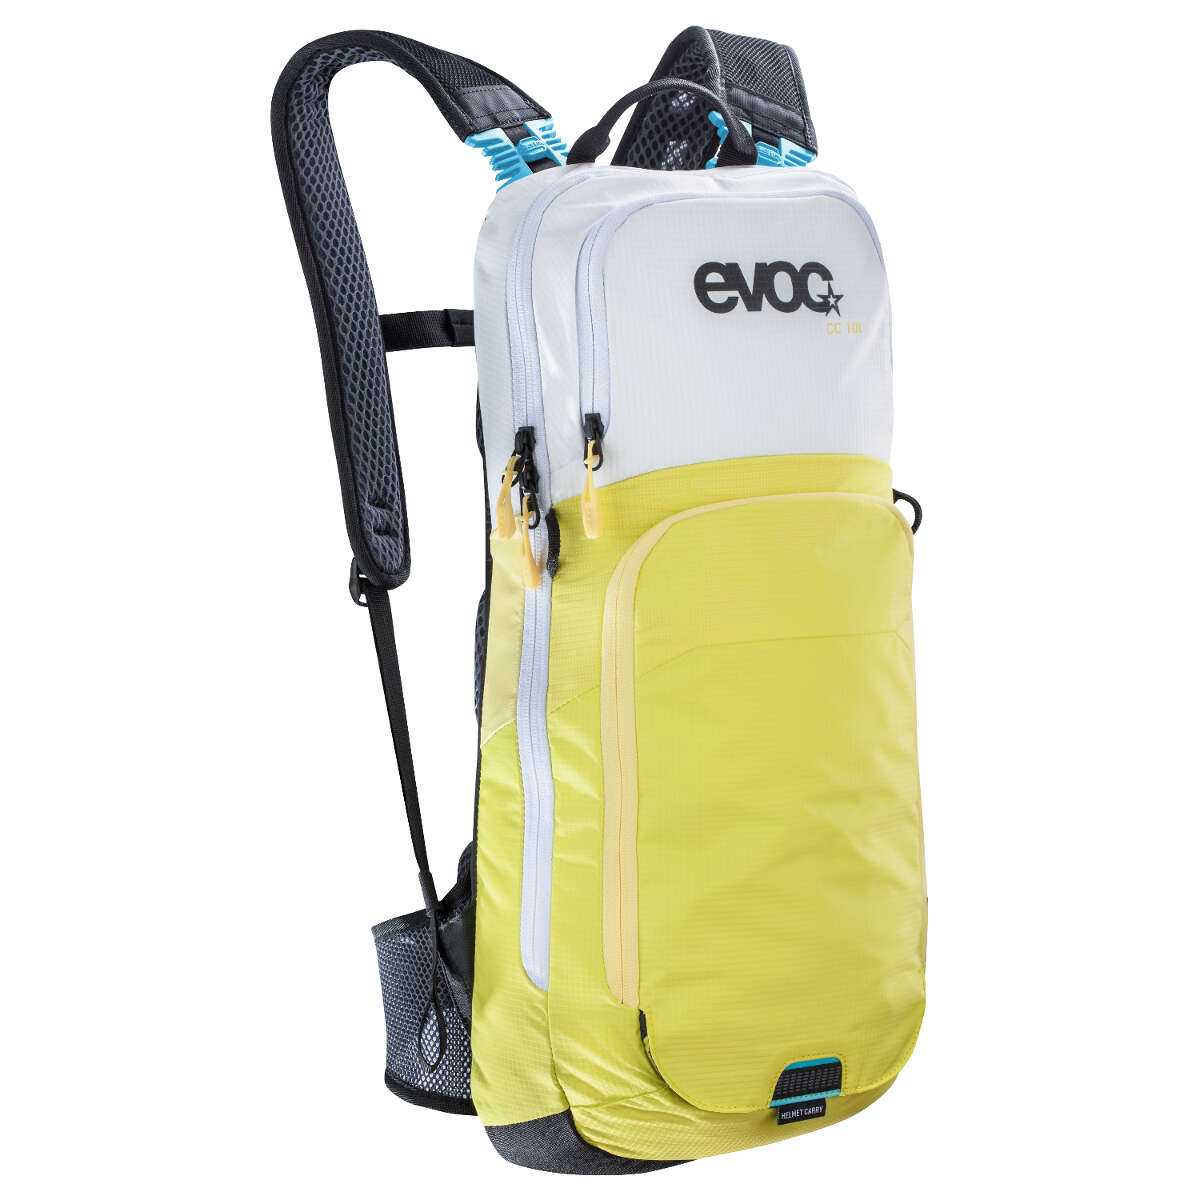 Evoc Backpack with Hydration System Compartment Cross Country White/Sulphur, 10 Liter